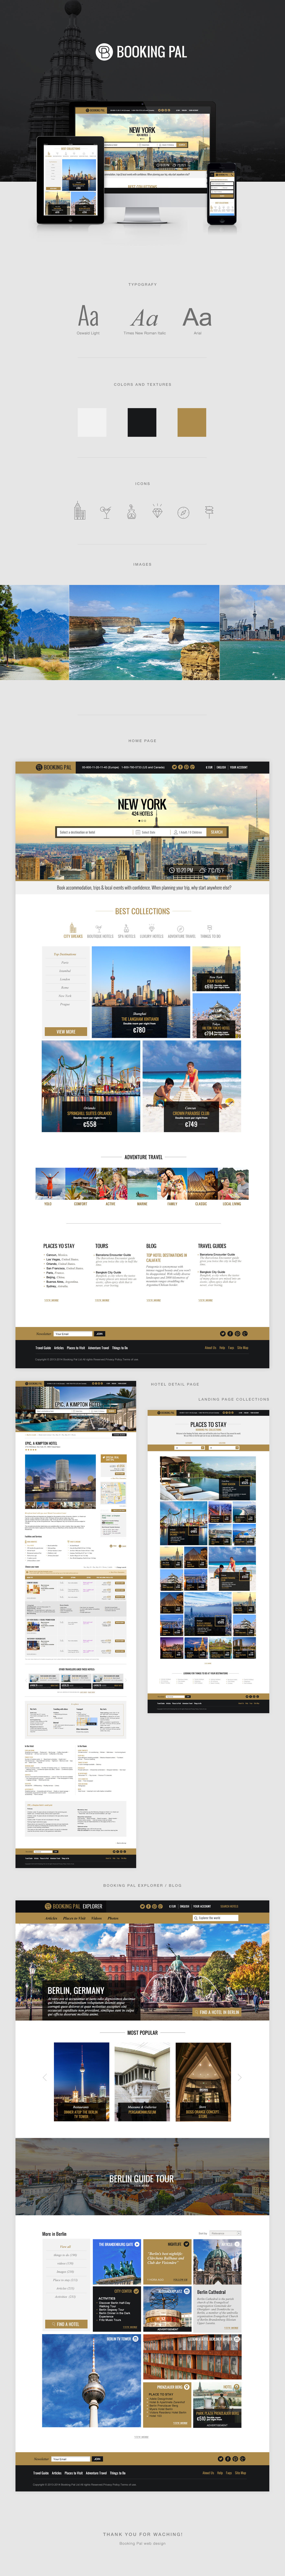 Travel Booking hotel Website BookingPal search Blog